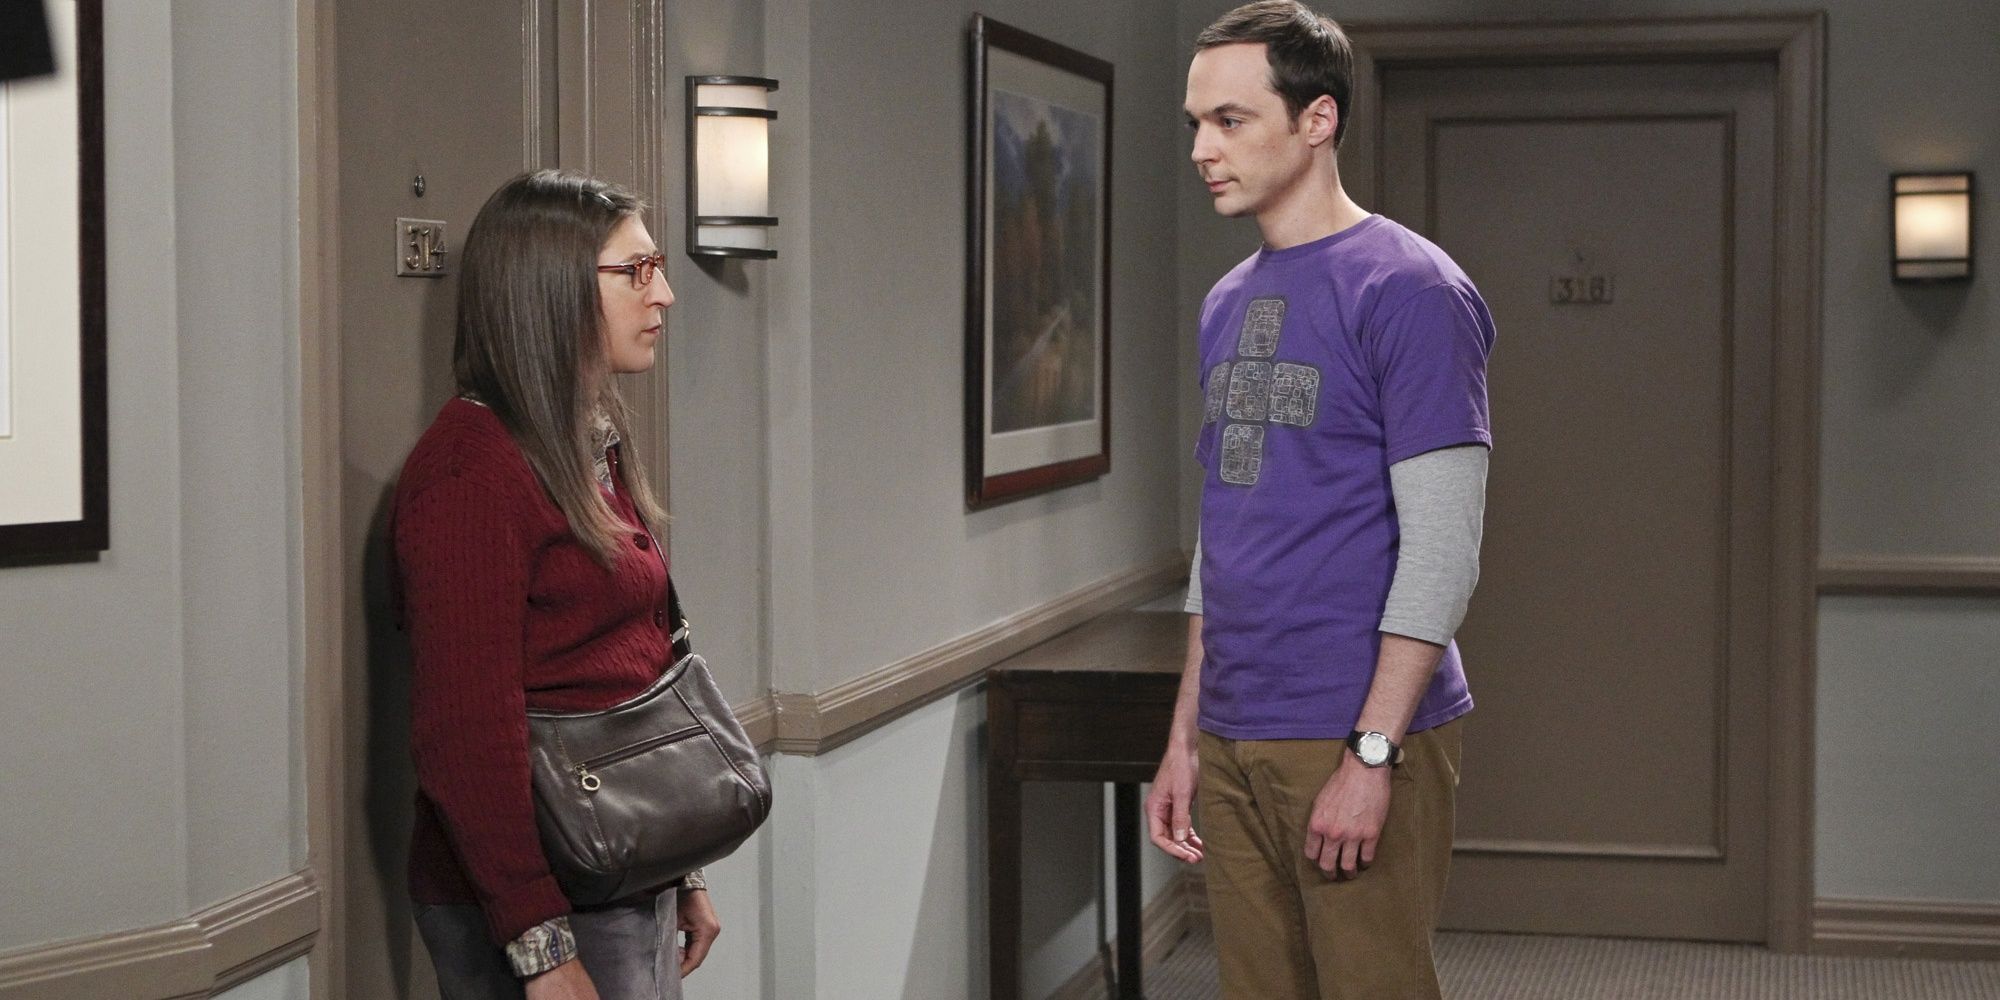 The Big Bang Theory -  Amy and Sheldon talk in the hallway